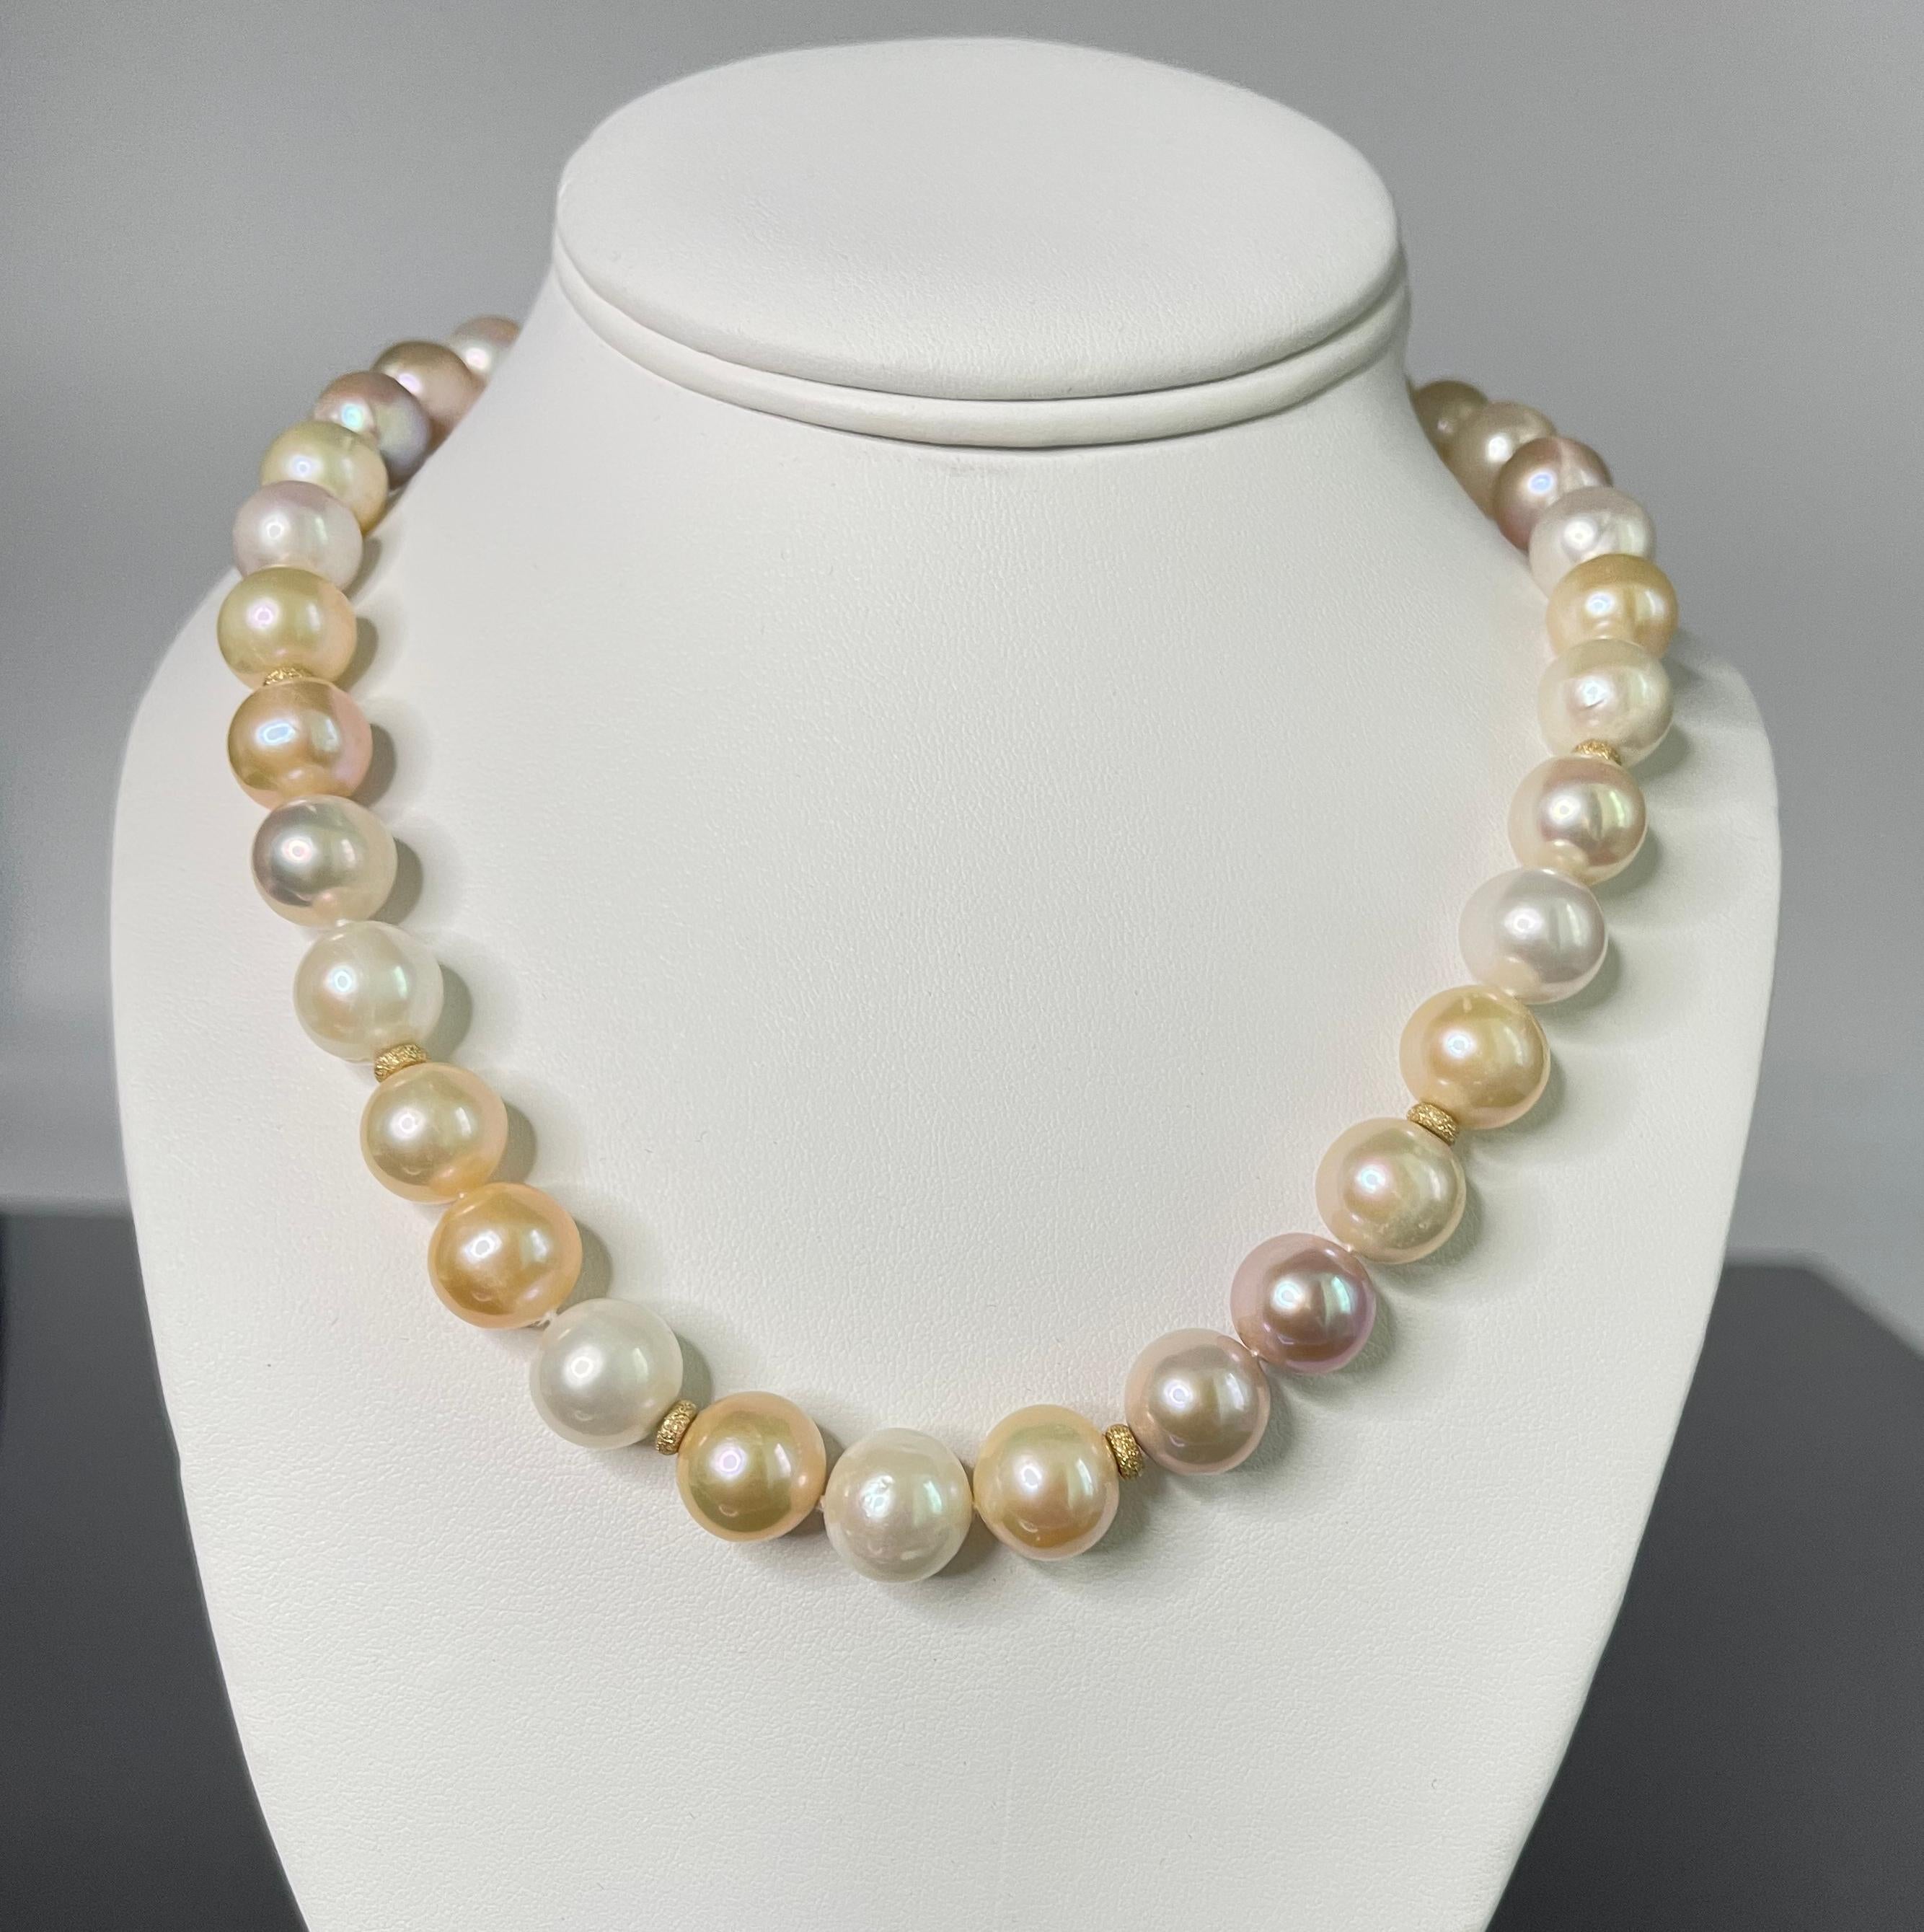 Women's 12-13mm Peach Freshwater Pearl Necklace with 14k Yellow Gold Accents For Sale